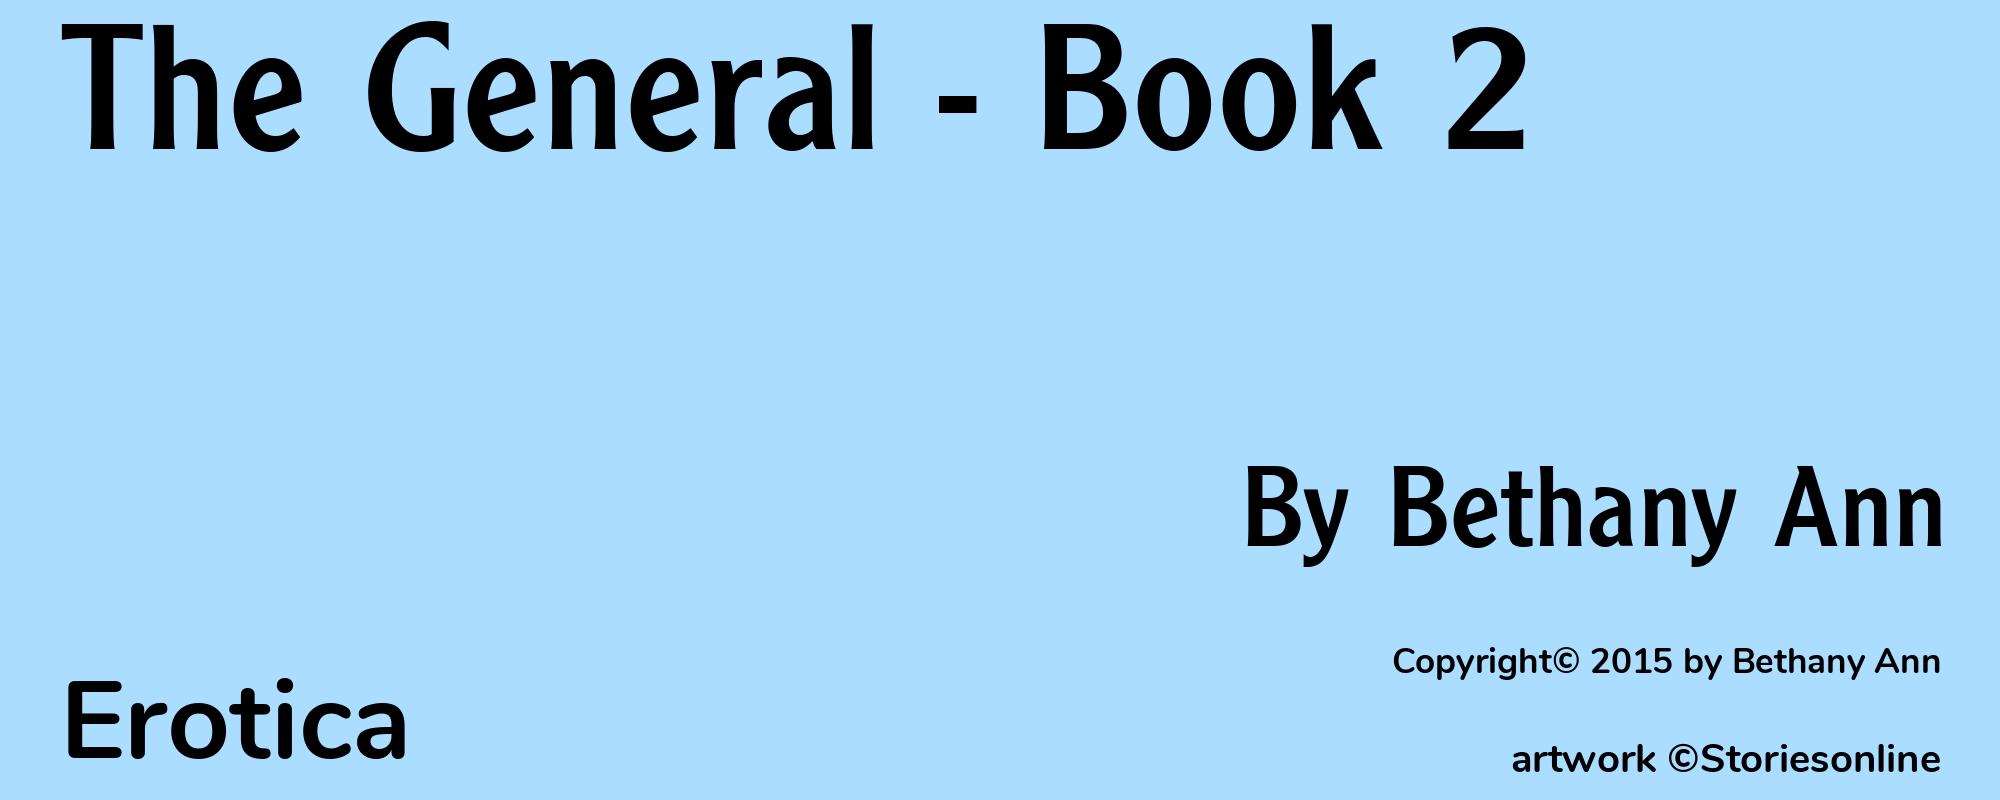 The General - Book 2 - Cover